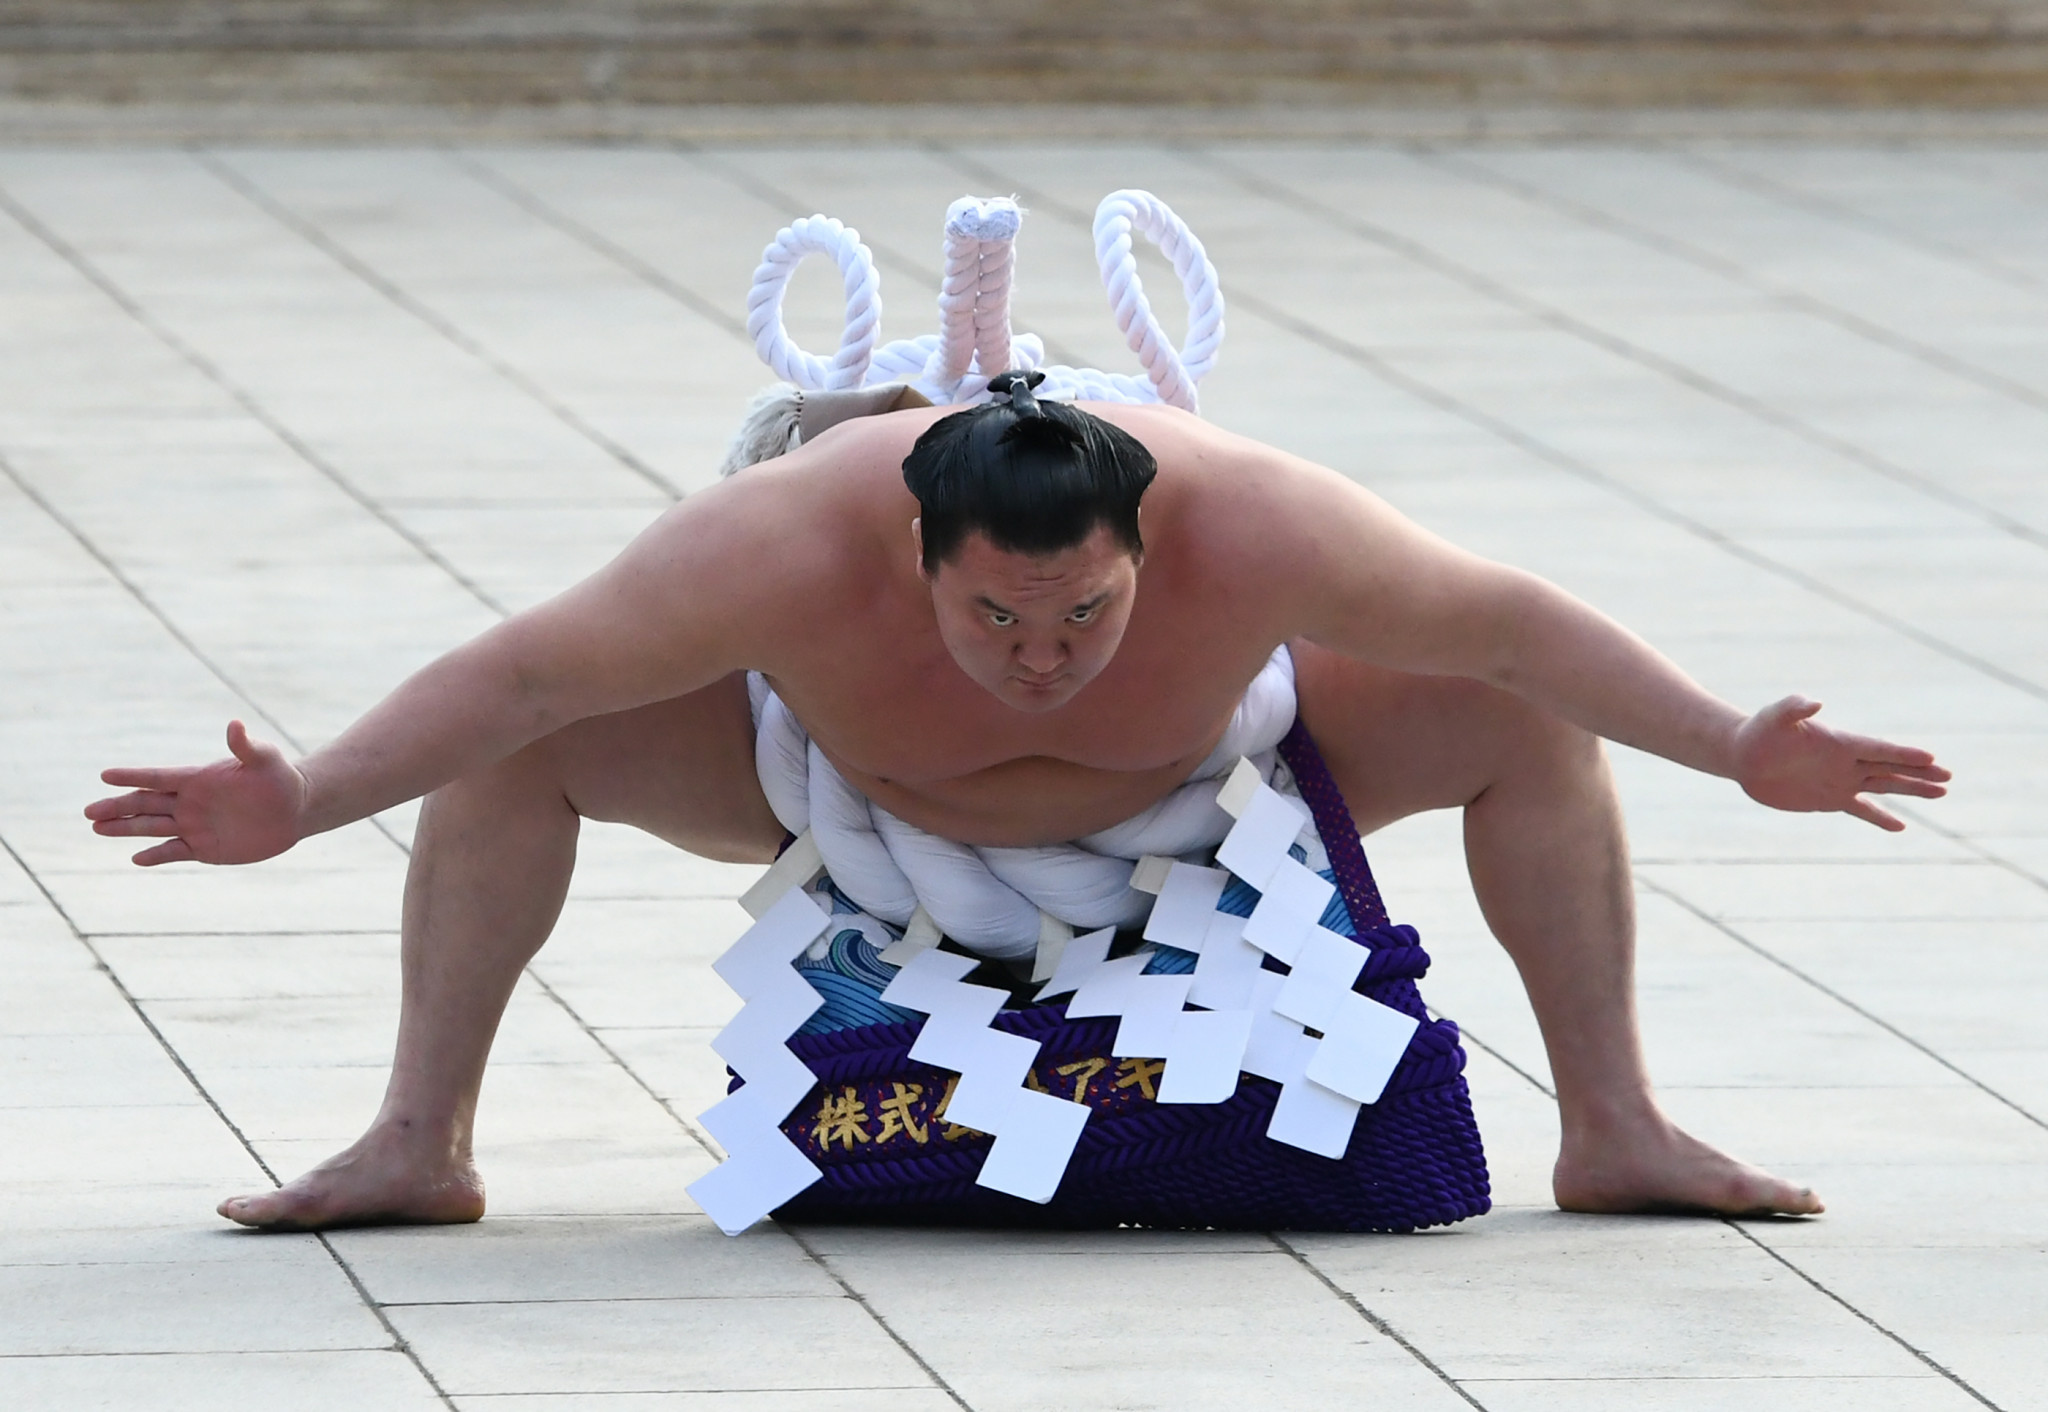 Sumo grand champioh Hakuho will take part in the Tokyo 2020 Torch Relay ©Getty Images